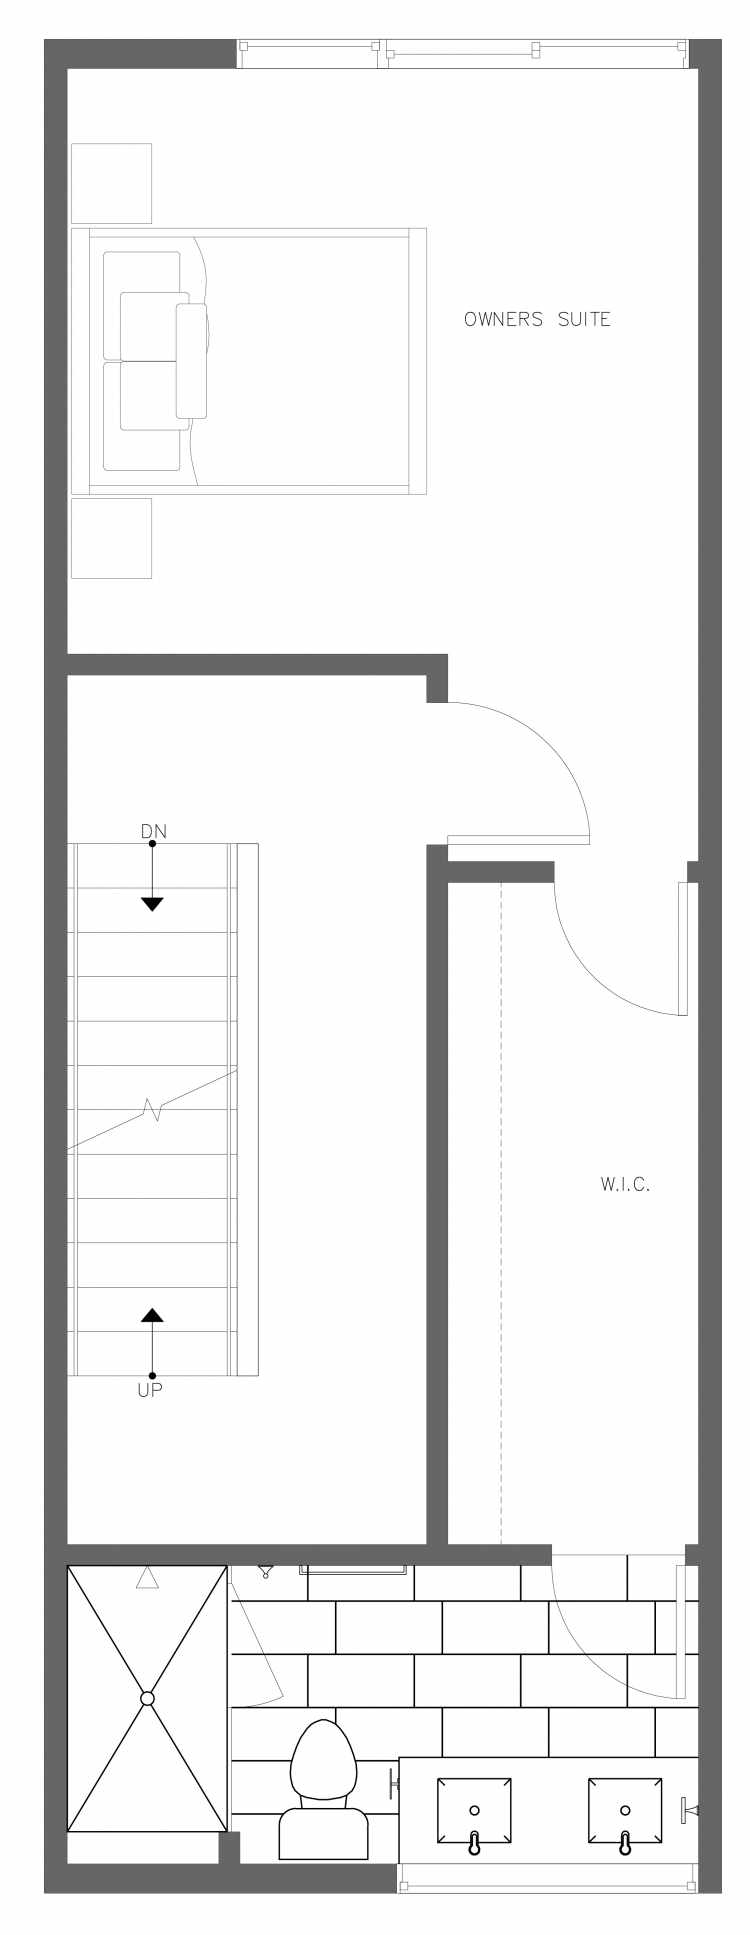 Third Floor Plan of 3418B 15th Ave W, One of the Arlo Townhomes in North Queen Anne